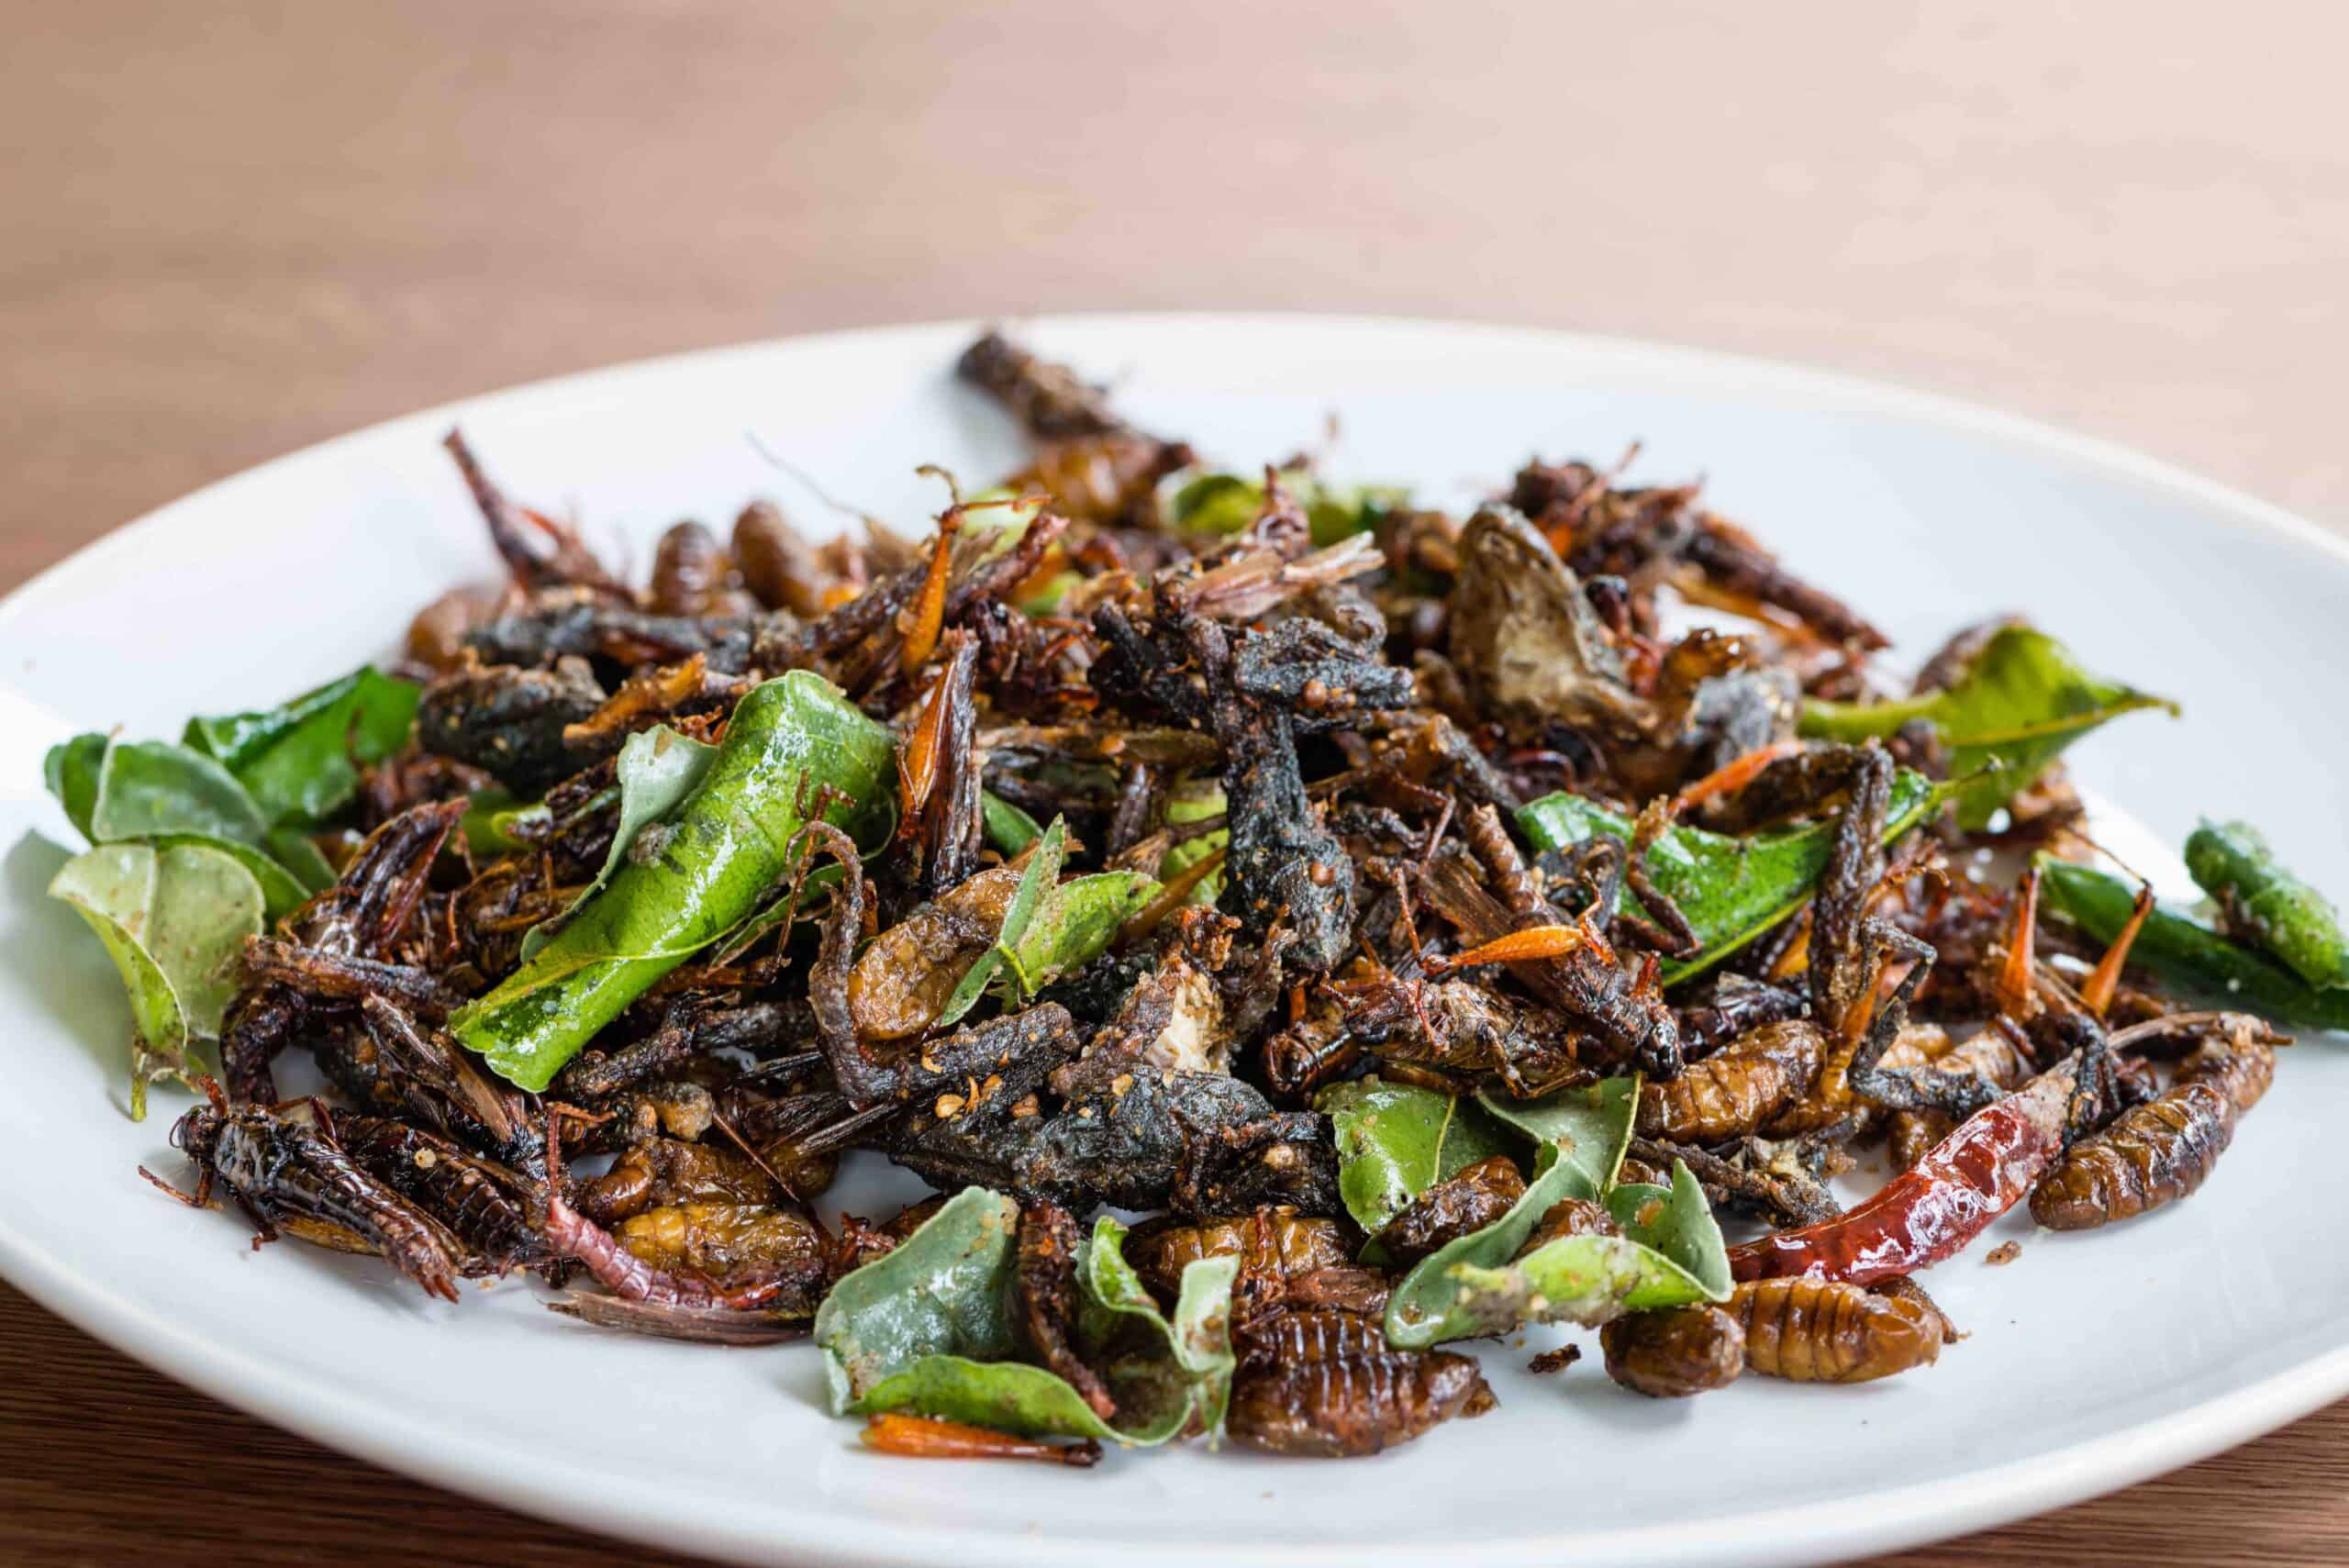 Fried edible insects mix on white plate with green lime leaves on wooden table.  Fried insects are regional delicacies food in Thailand